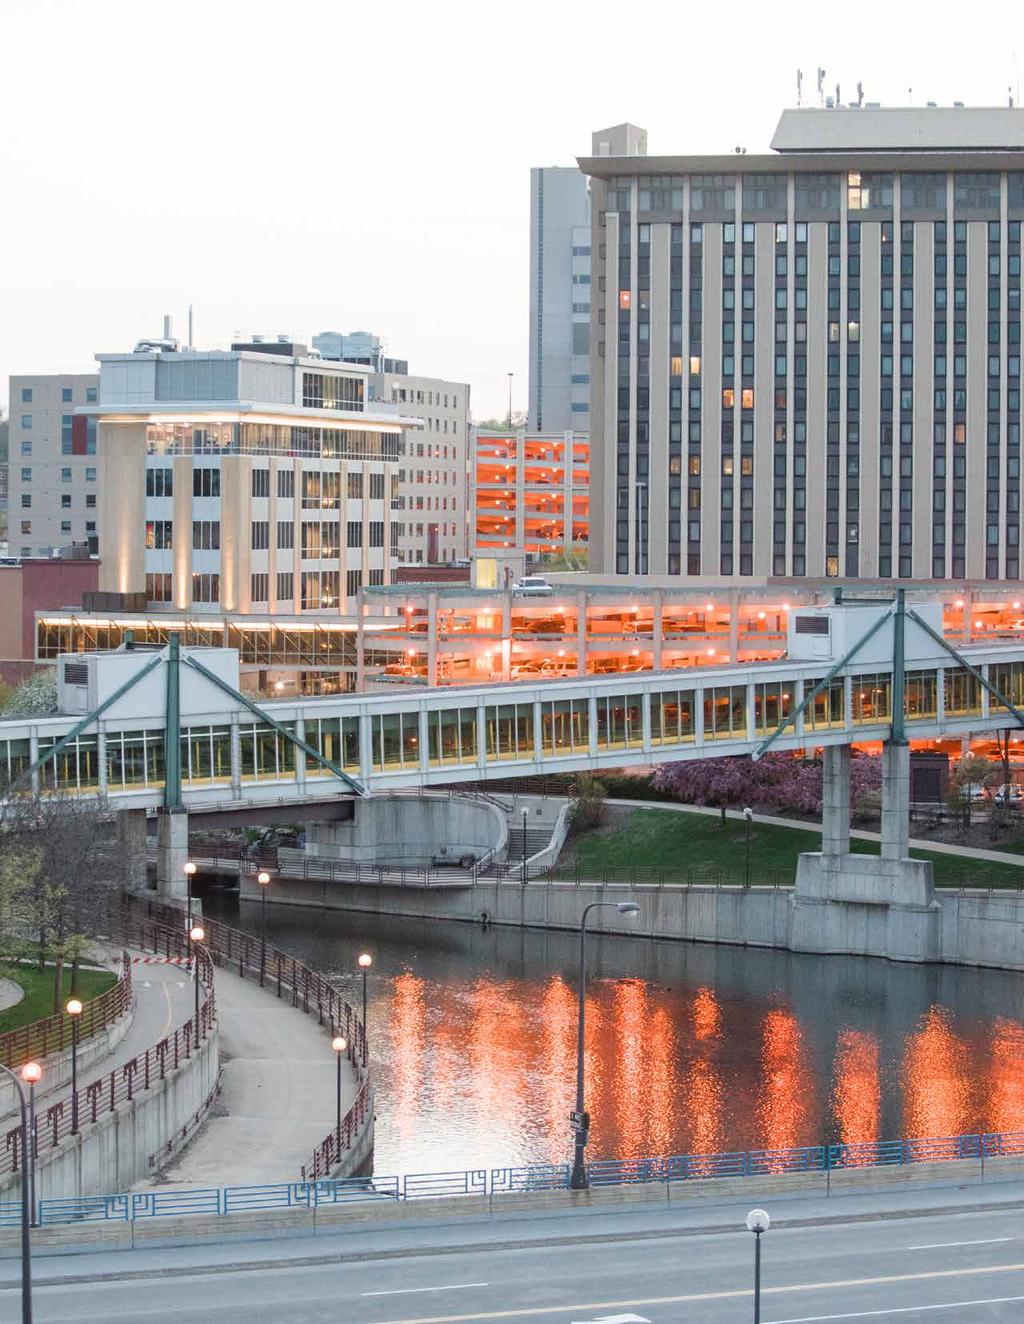 OUR MISSION The Rochester Convention & Visitors Bureau stimulates economic growth through visitor spending with aggressive sales, marketing, partnerships and destination development strategies while